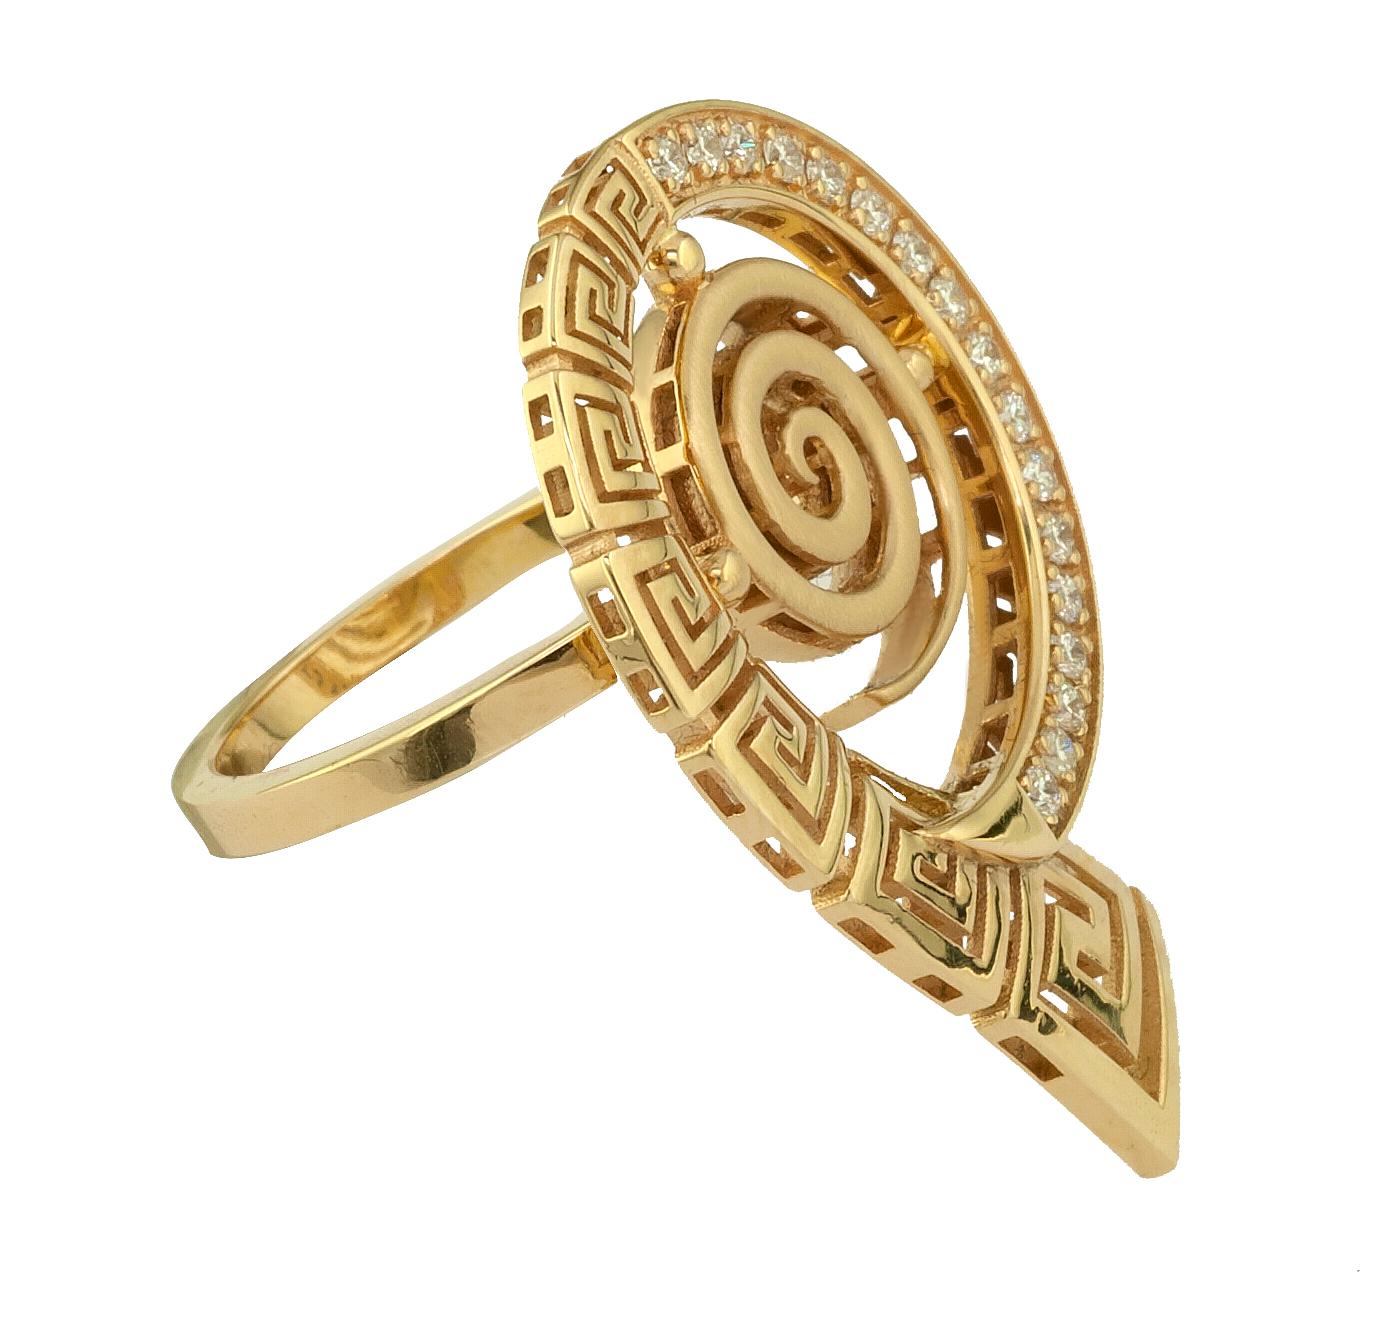 This S.Georgios designer spiral band ring is handmade from solid 18 Karat Yellow Gold and carved forming the Greek Key design which is the symbol of eternity. This stunning ring features 17 brilliant-cut White Diamonds total weight of 0.27 Carat.
We